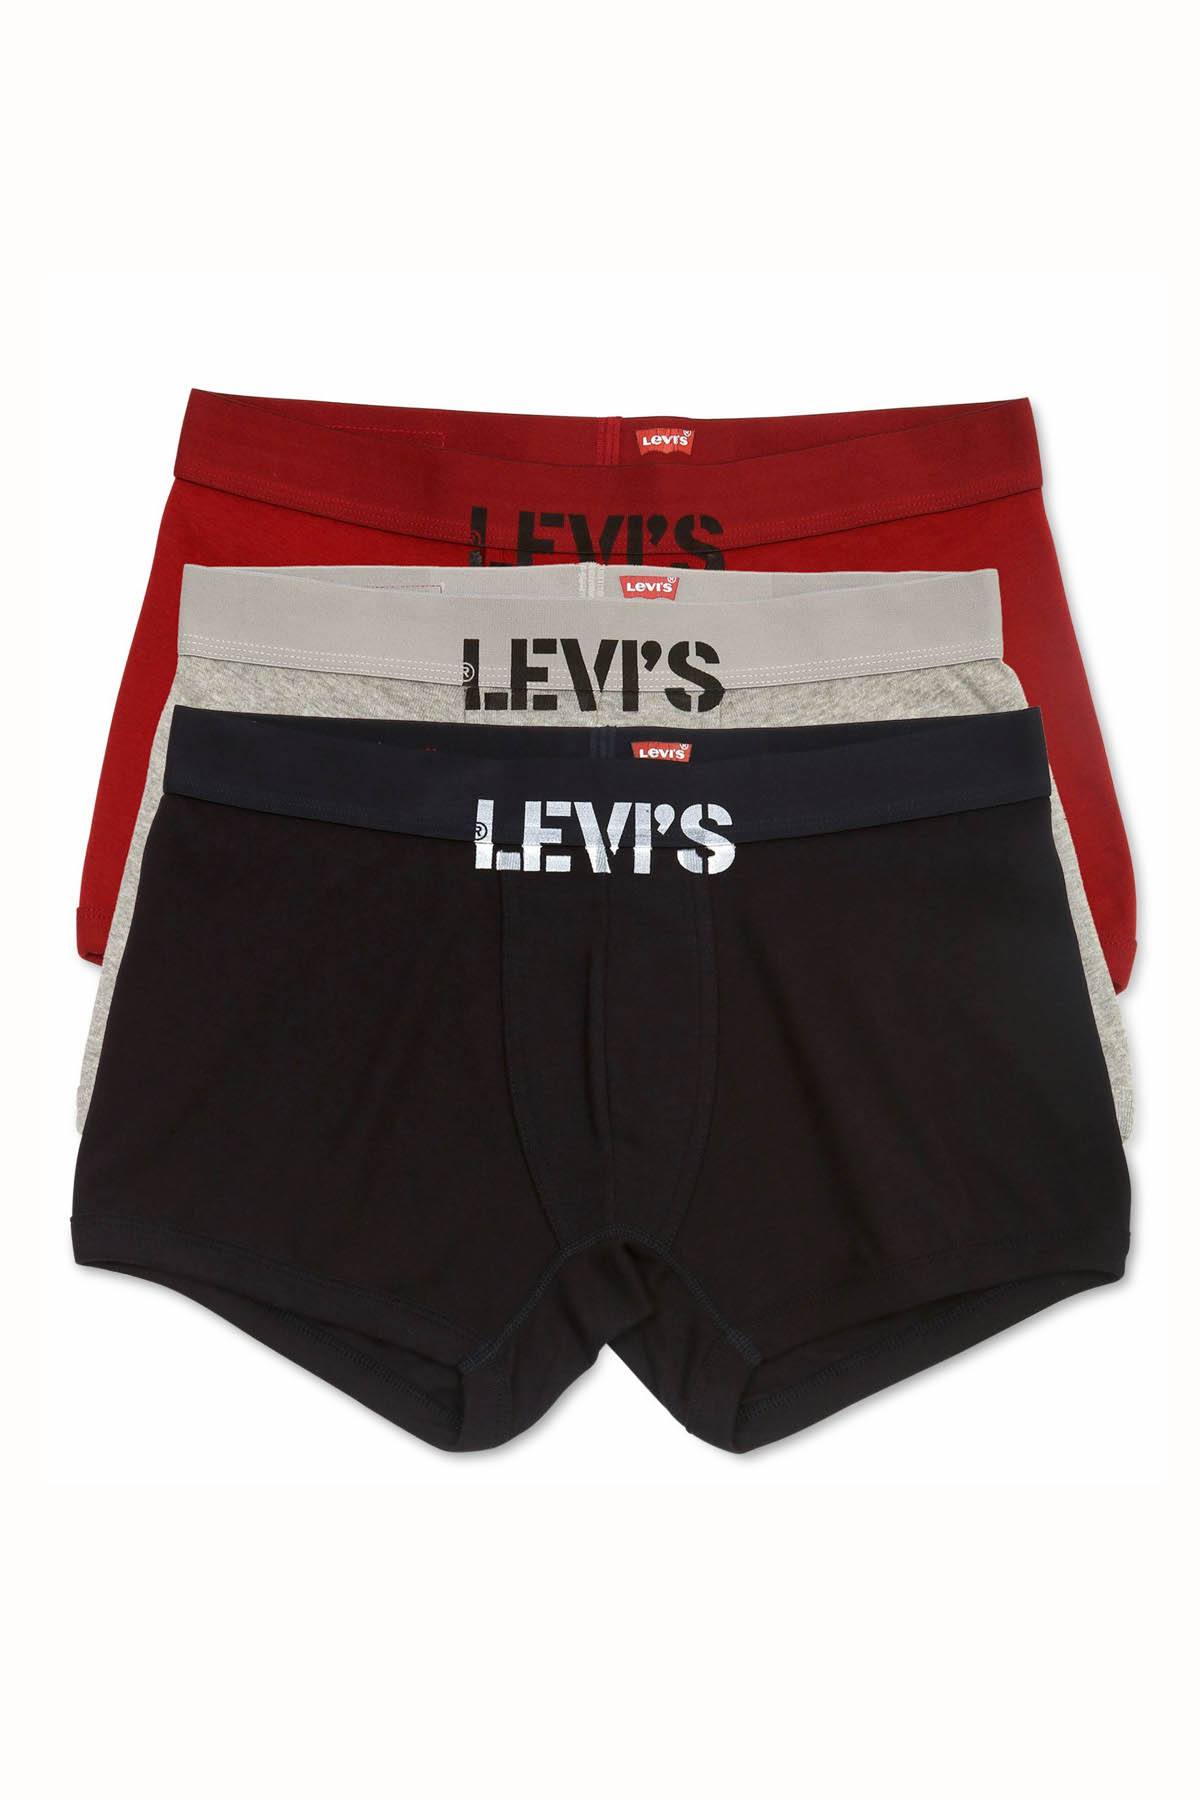 Levi's Red/Navy/Grey Trunk 3-Pack